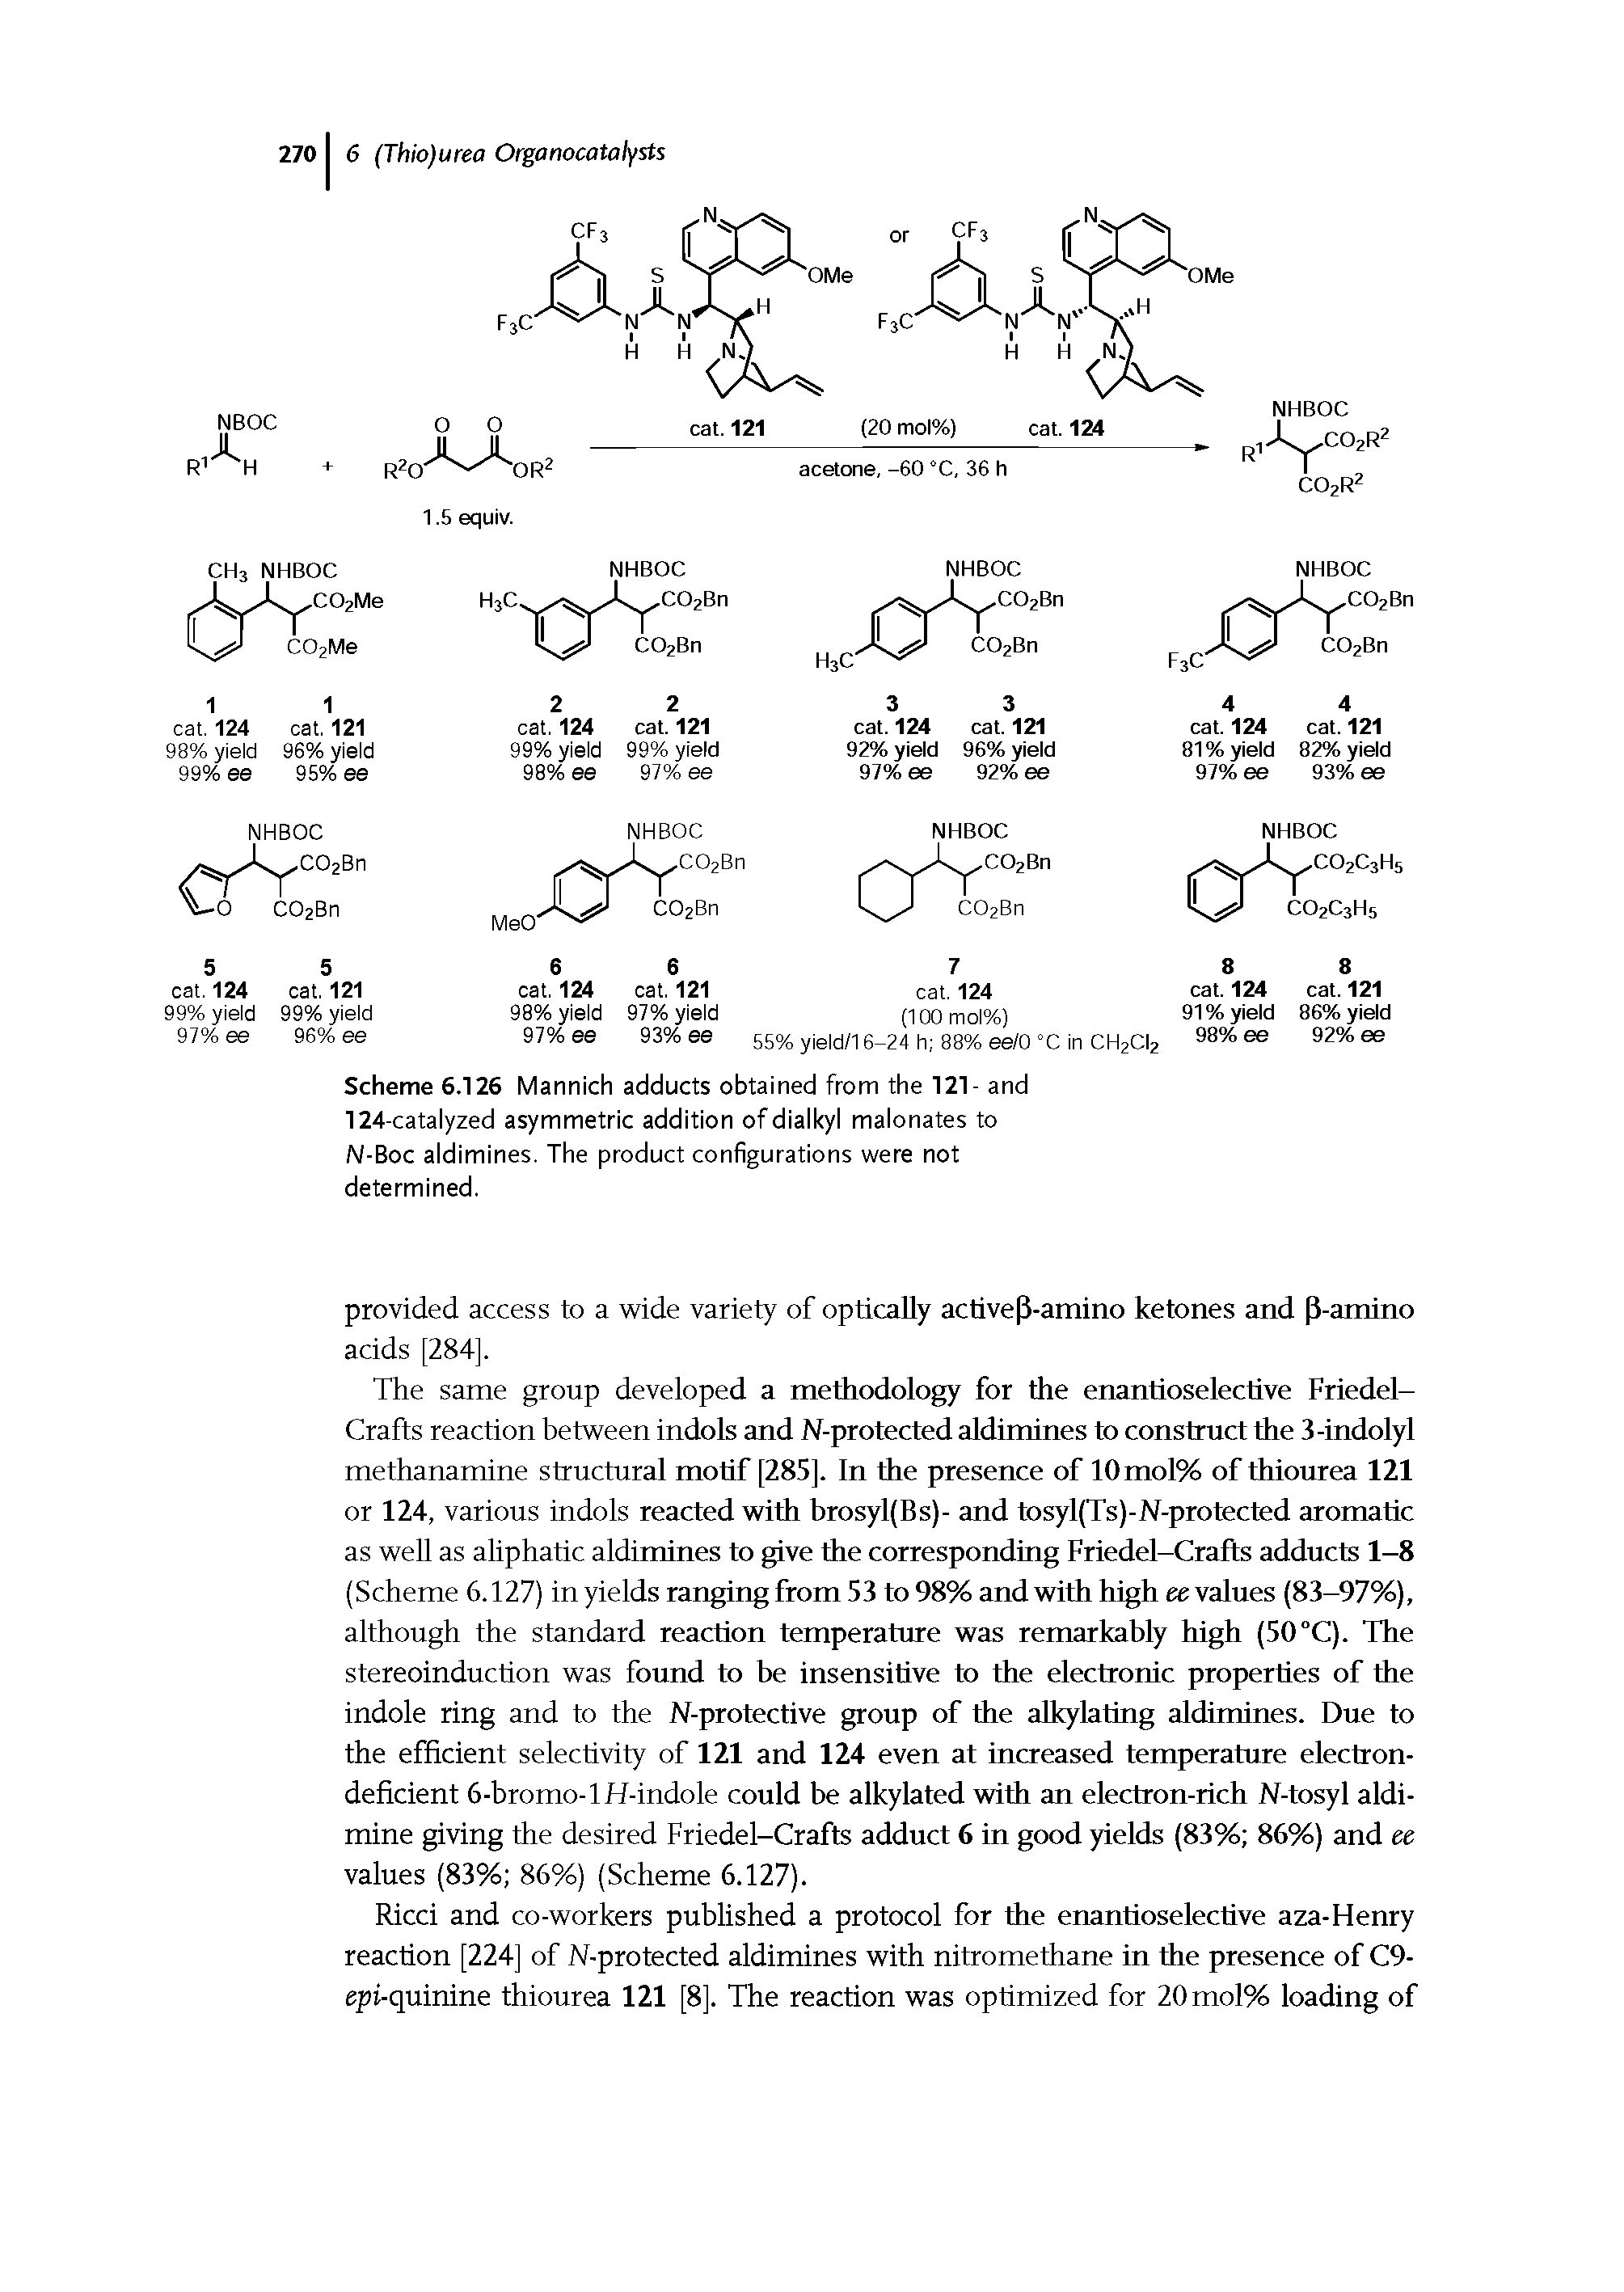 Scheme 6.126 Mannich adducts obtained from the 121- and 124-catalyzed asymmetric addition of dialkyl malonates to N-Boc aldimines. The product configurations were not determined.